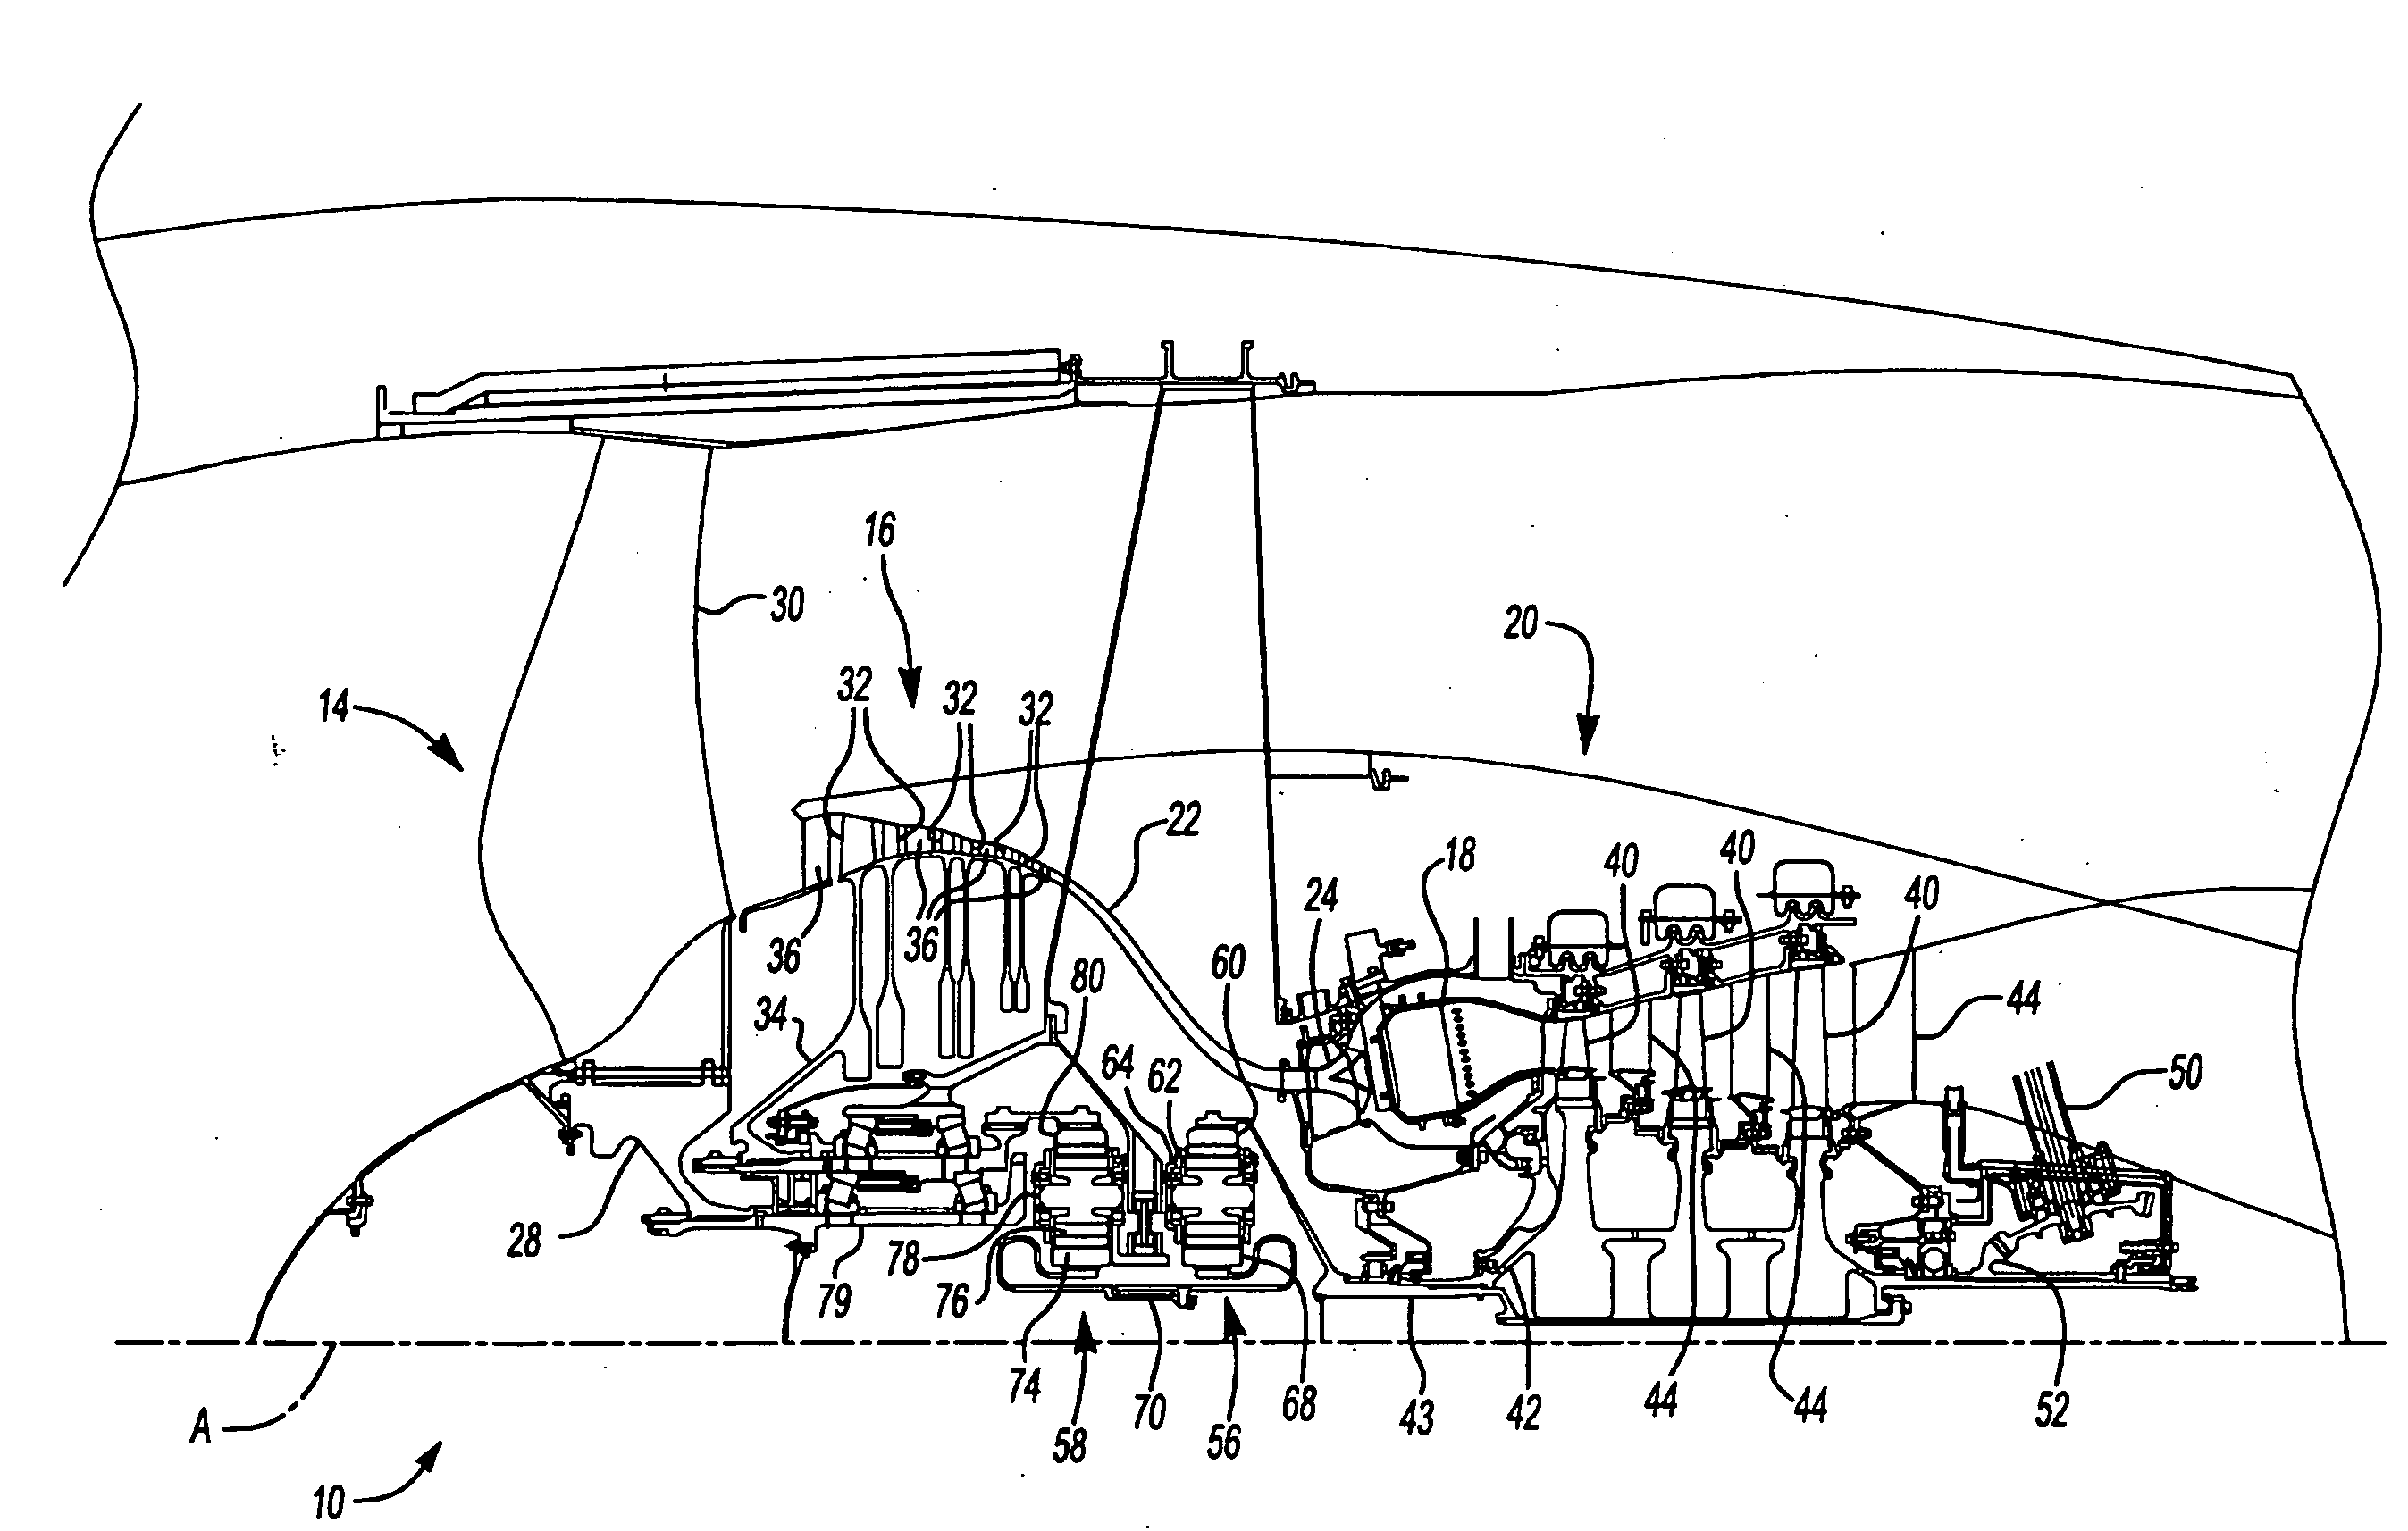 Turbine engine with differential gear driven fan and compressor